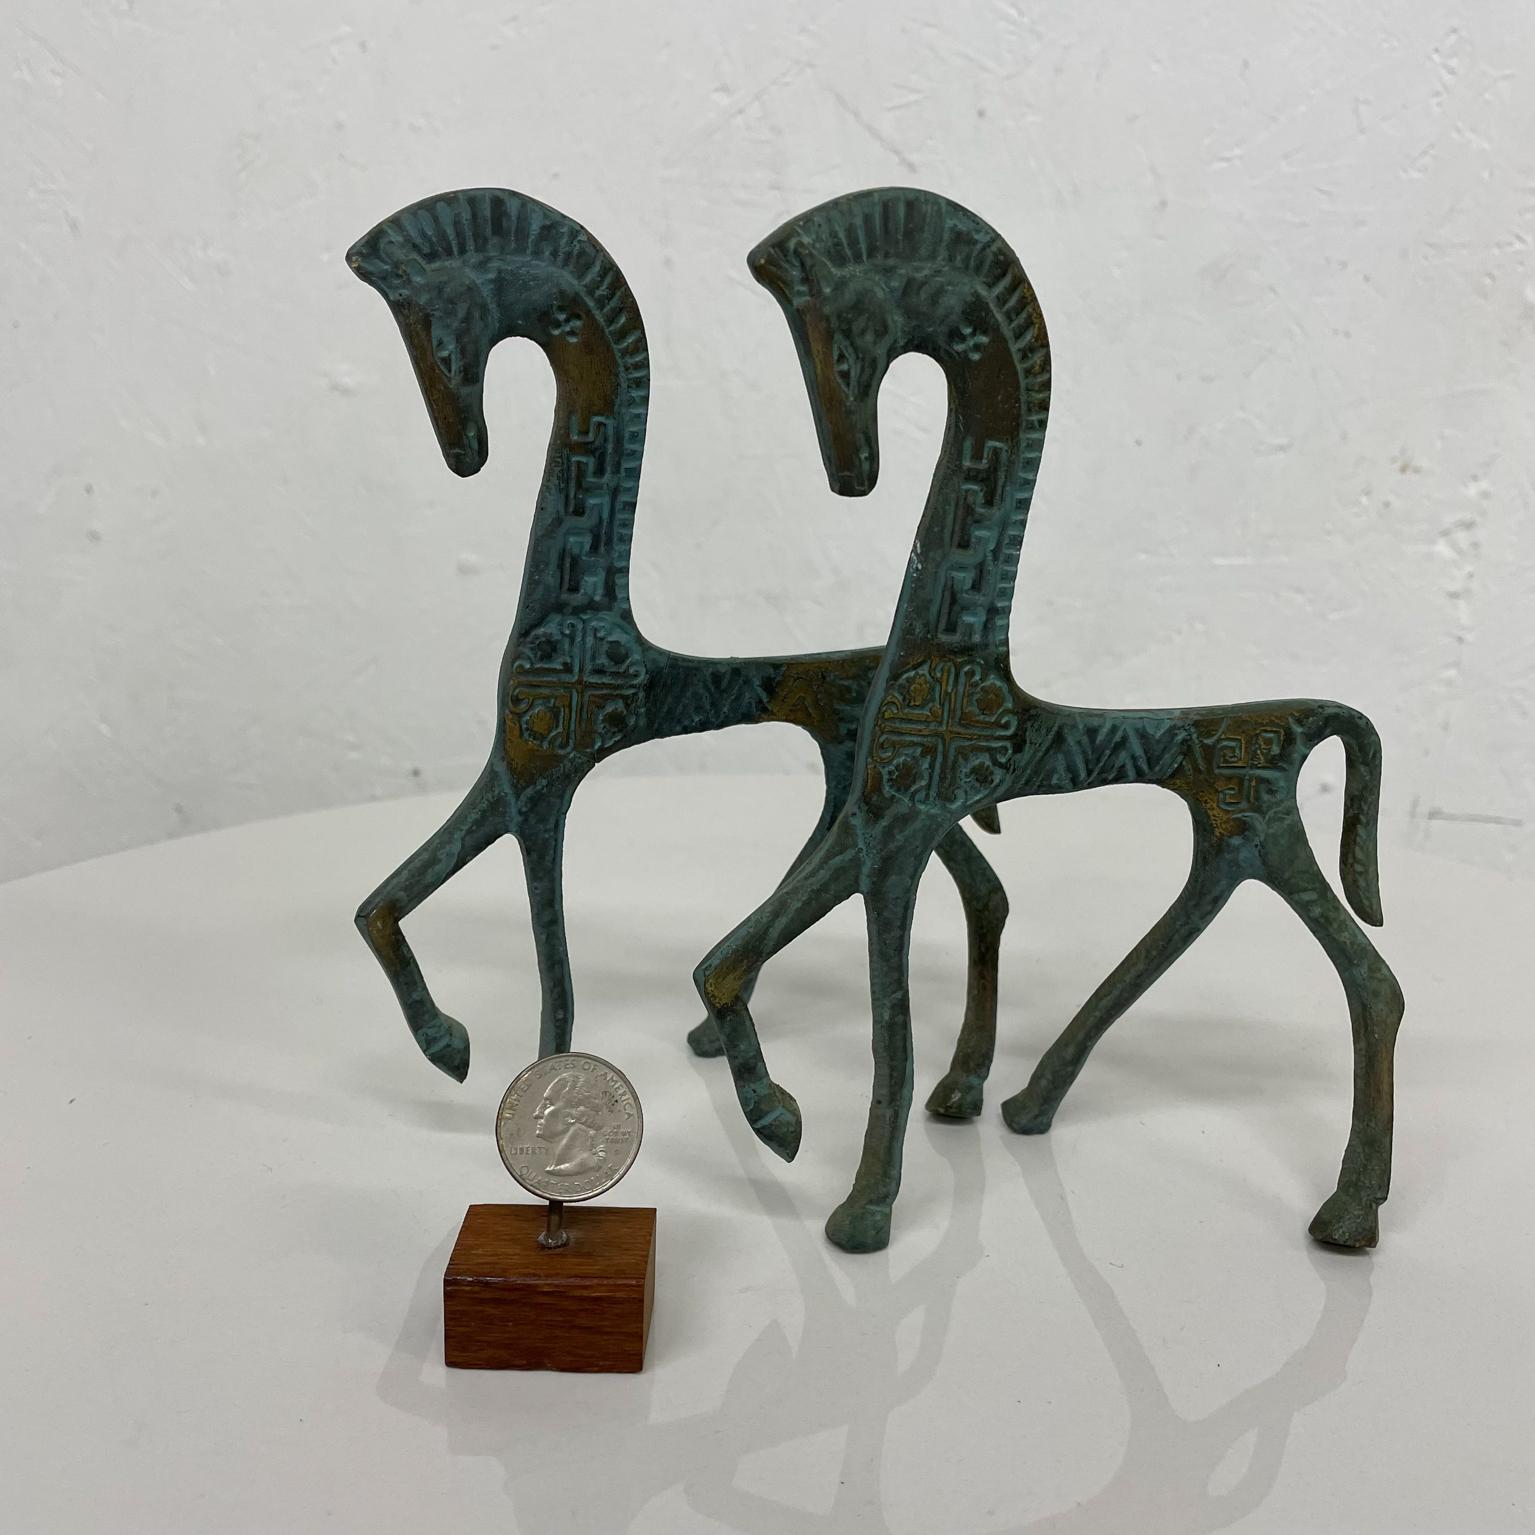 Horses
Proud pair of patinated bronze Etruscan horse sculptures.
Sleek modernist aesthetic.
In the style Karl Hagenauer bronze figures. 
Unmarked.
Measures: 7.25 H X 5.63 D X 2.25 W
Preowned original vintage unrestored condition.
Refer to images.
 